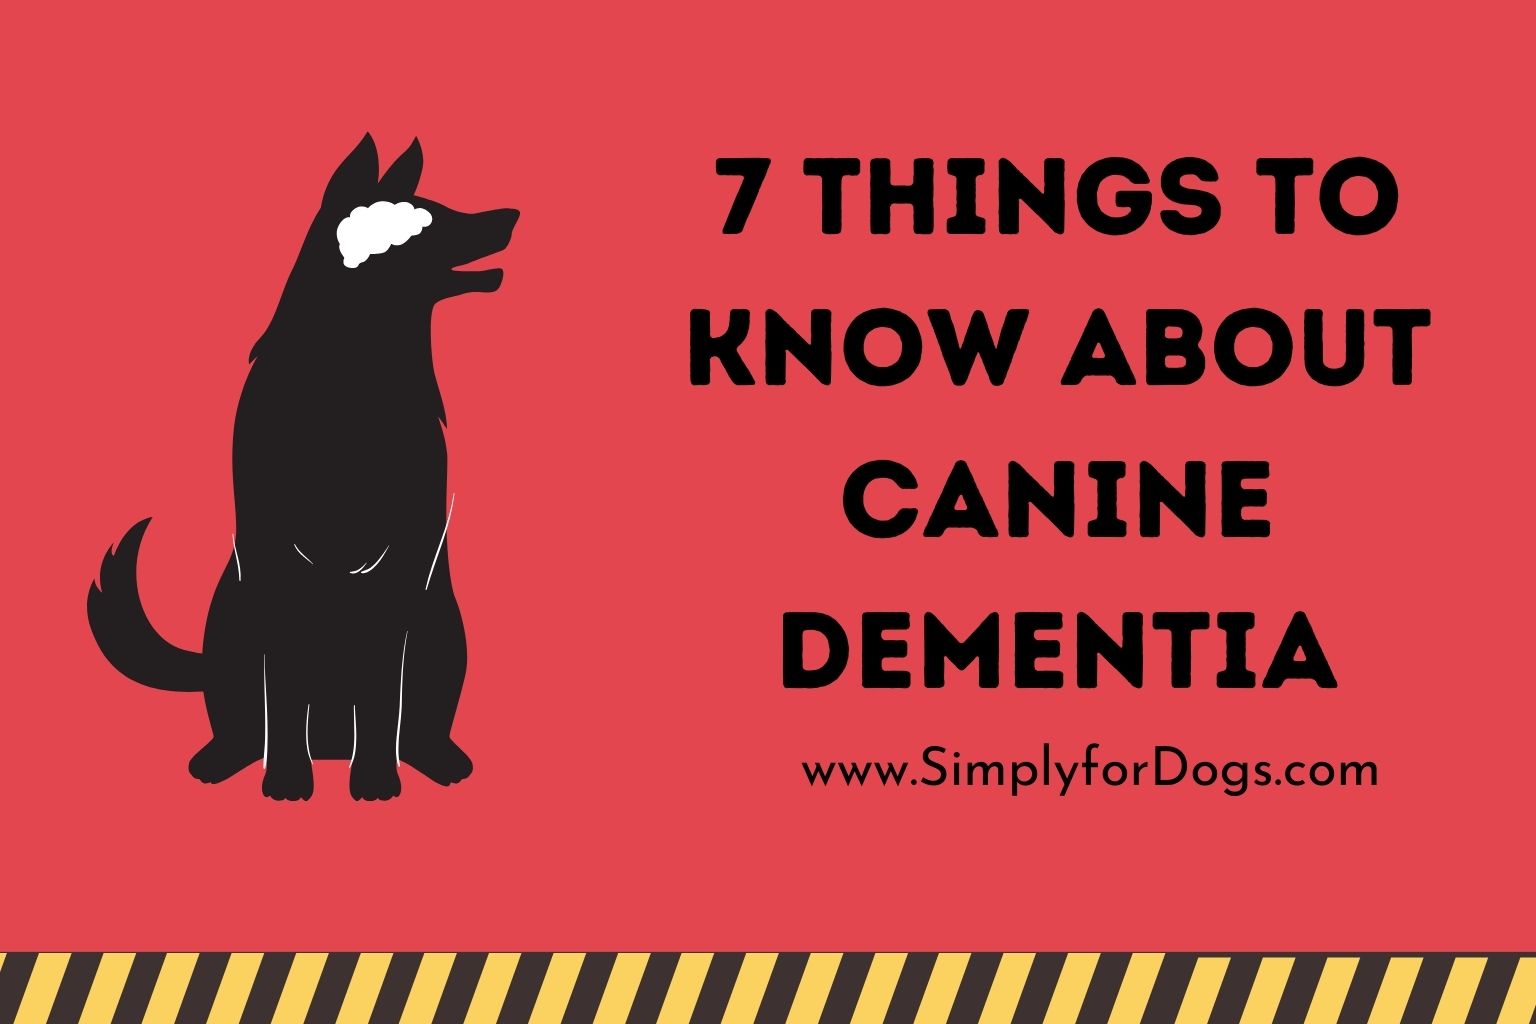 7 Things to Know About Canine Dementia